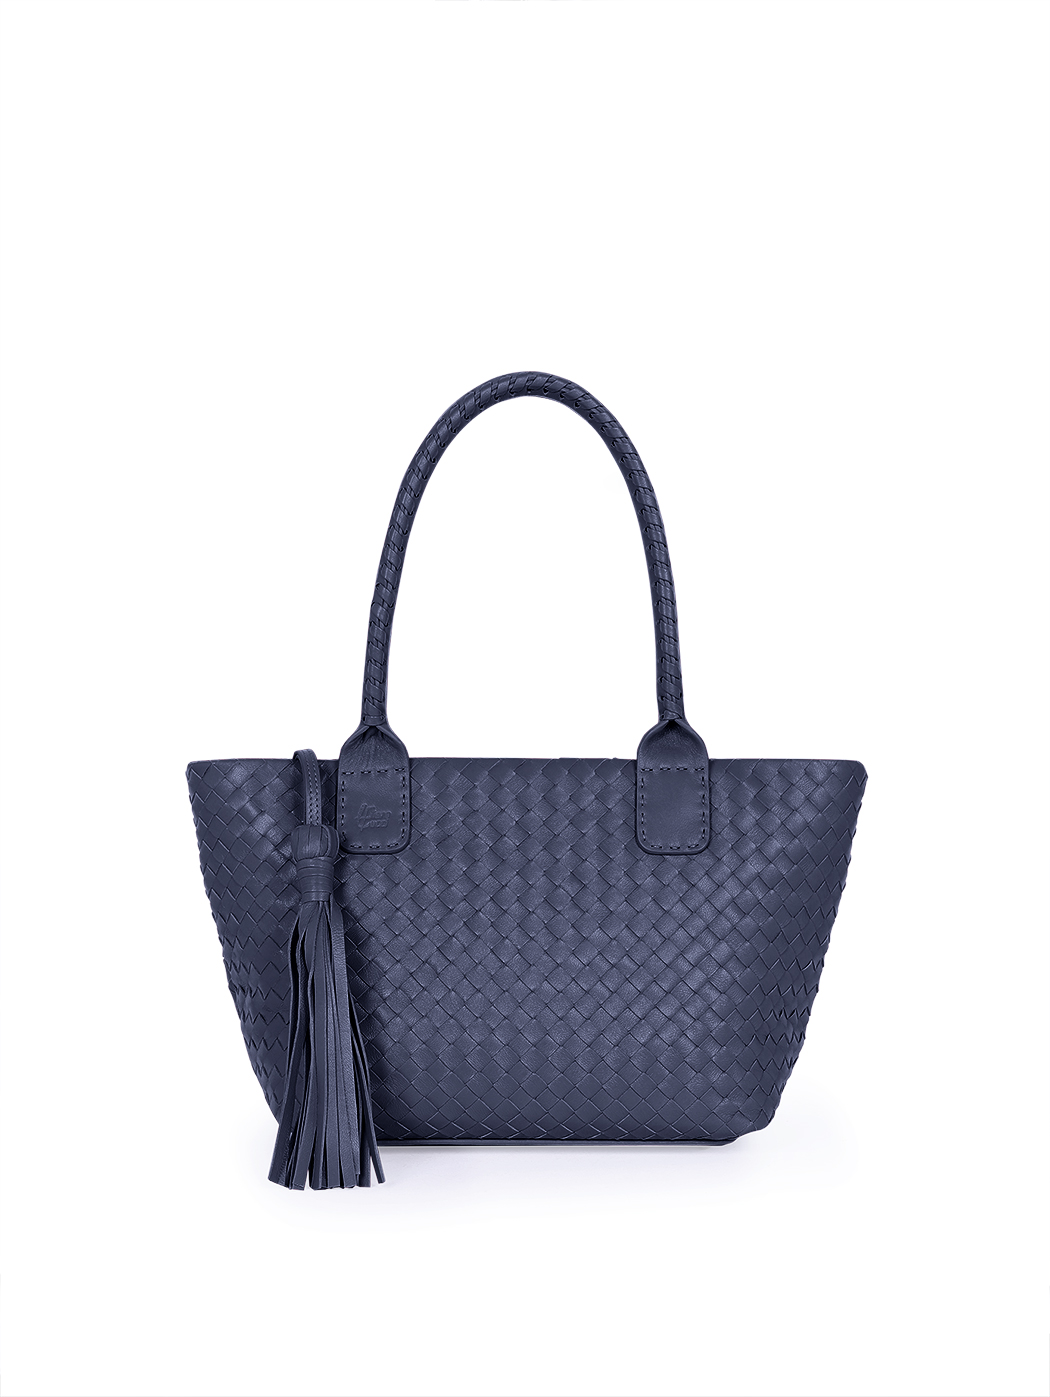 Medium Top Handle Woven Leather Shoulder Tote Navy Blue